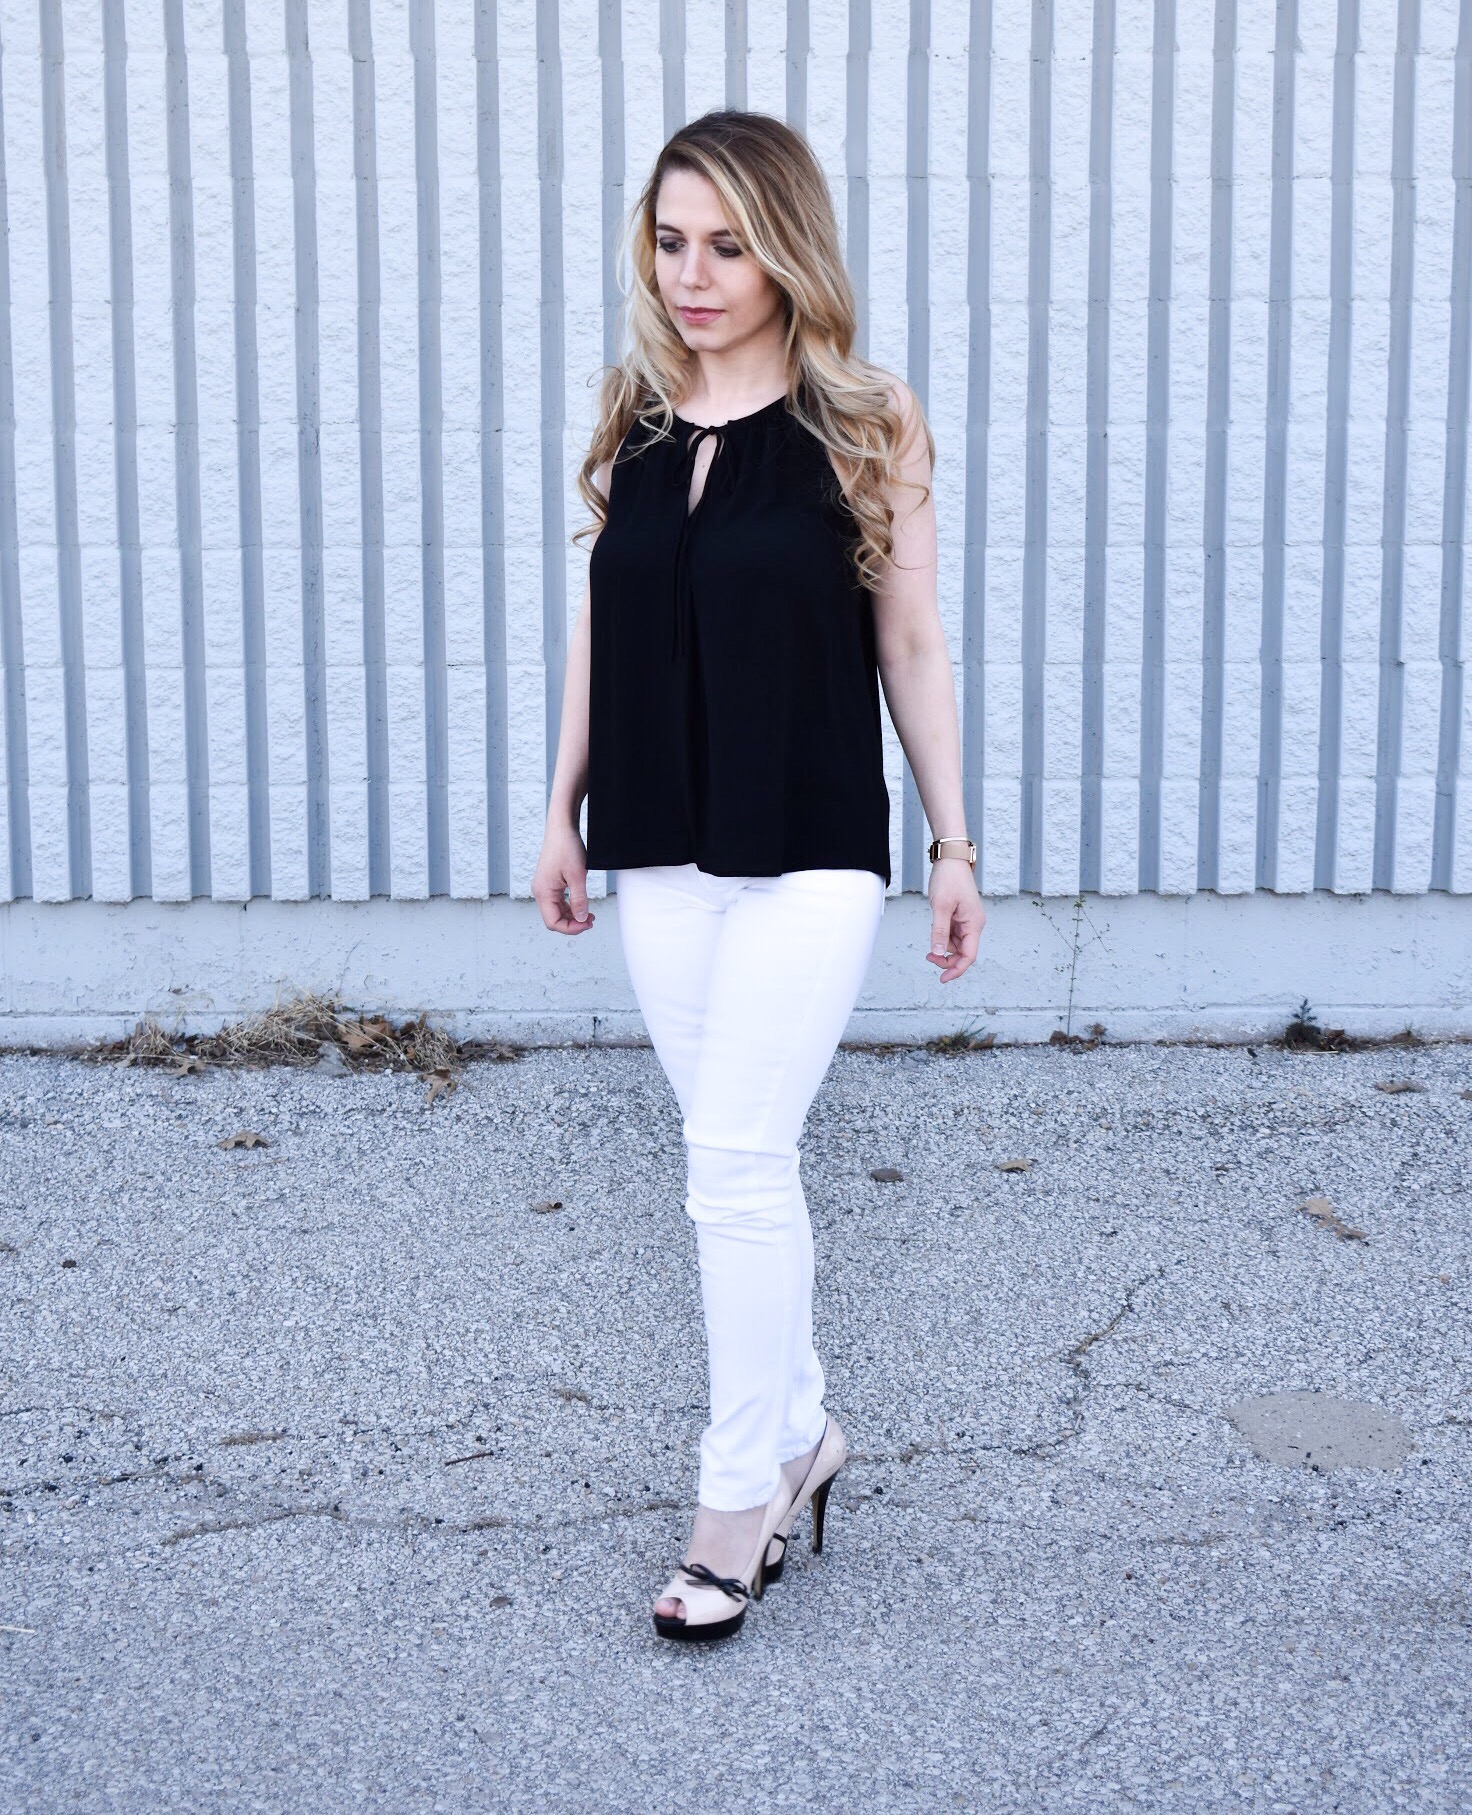 Monochrome Looks for Spring: Some people think you can't wear black and white in the spring. Those people are wrong. Fashion blogger COVET by tricia showcases a springtime monochrome look featuring Banana Republic Stay White Denim and a Tyche black halter top. Minimalist jewelry completes the look. Monochrome is trending for spring 2018, so here's how to effortlessly incorporate it into your wardrobe.